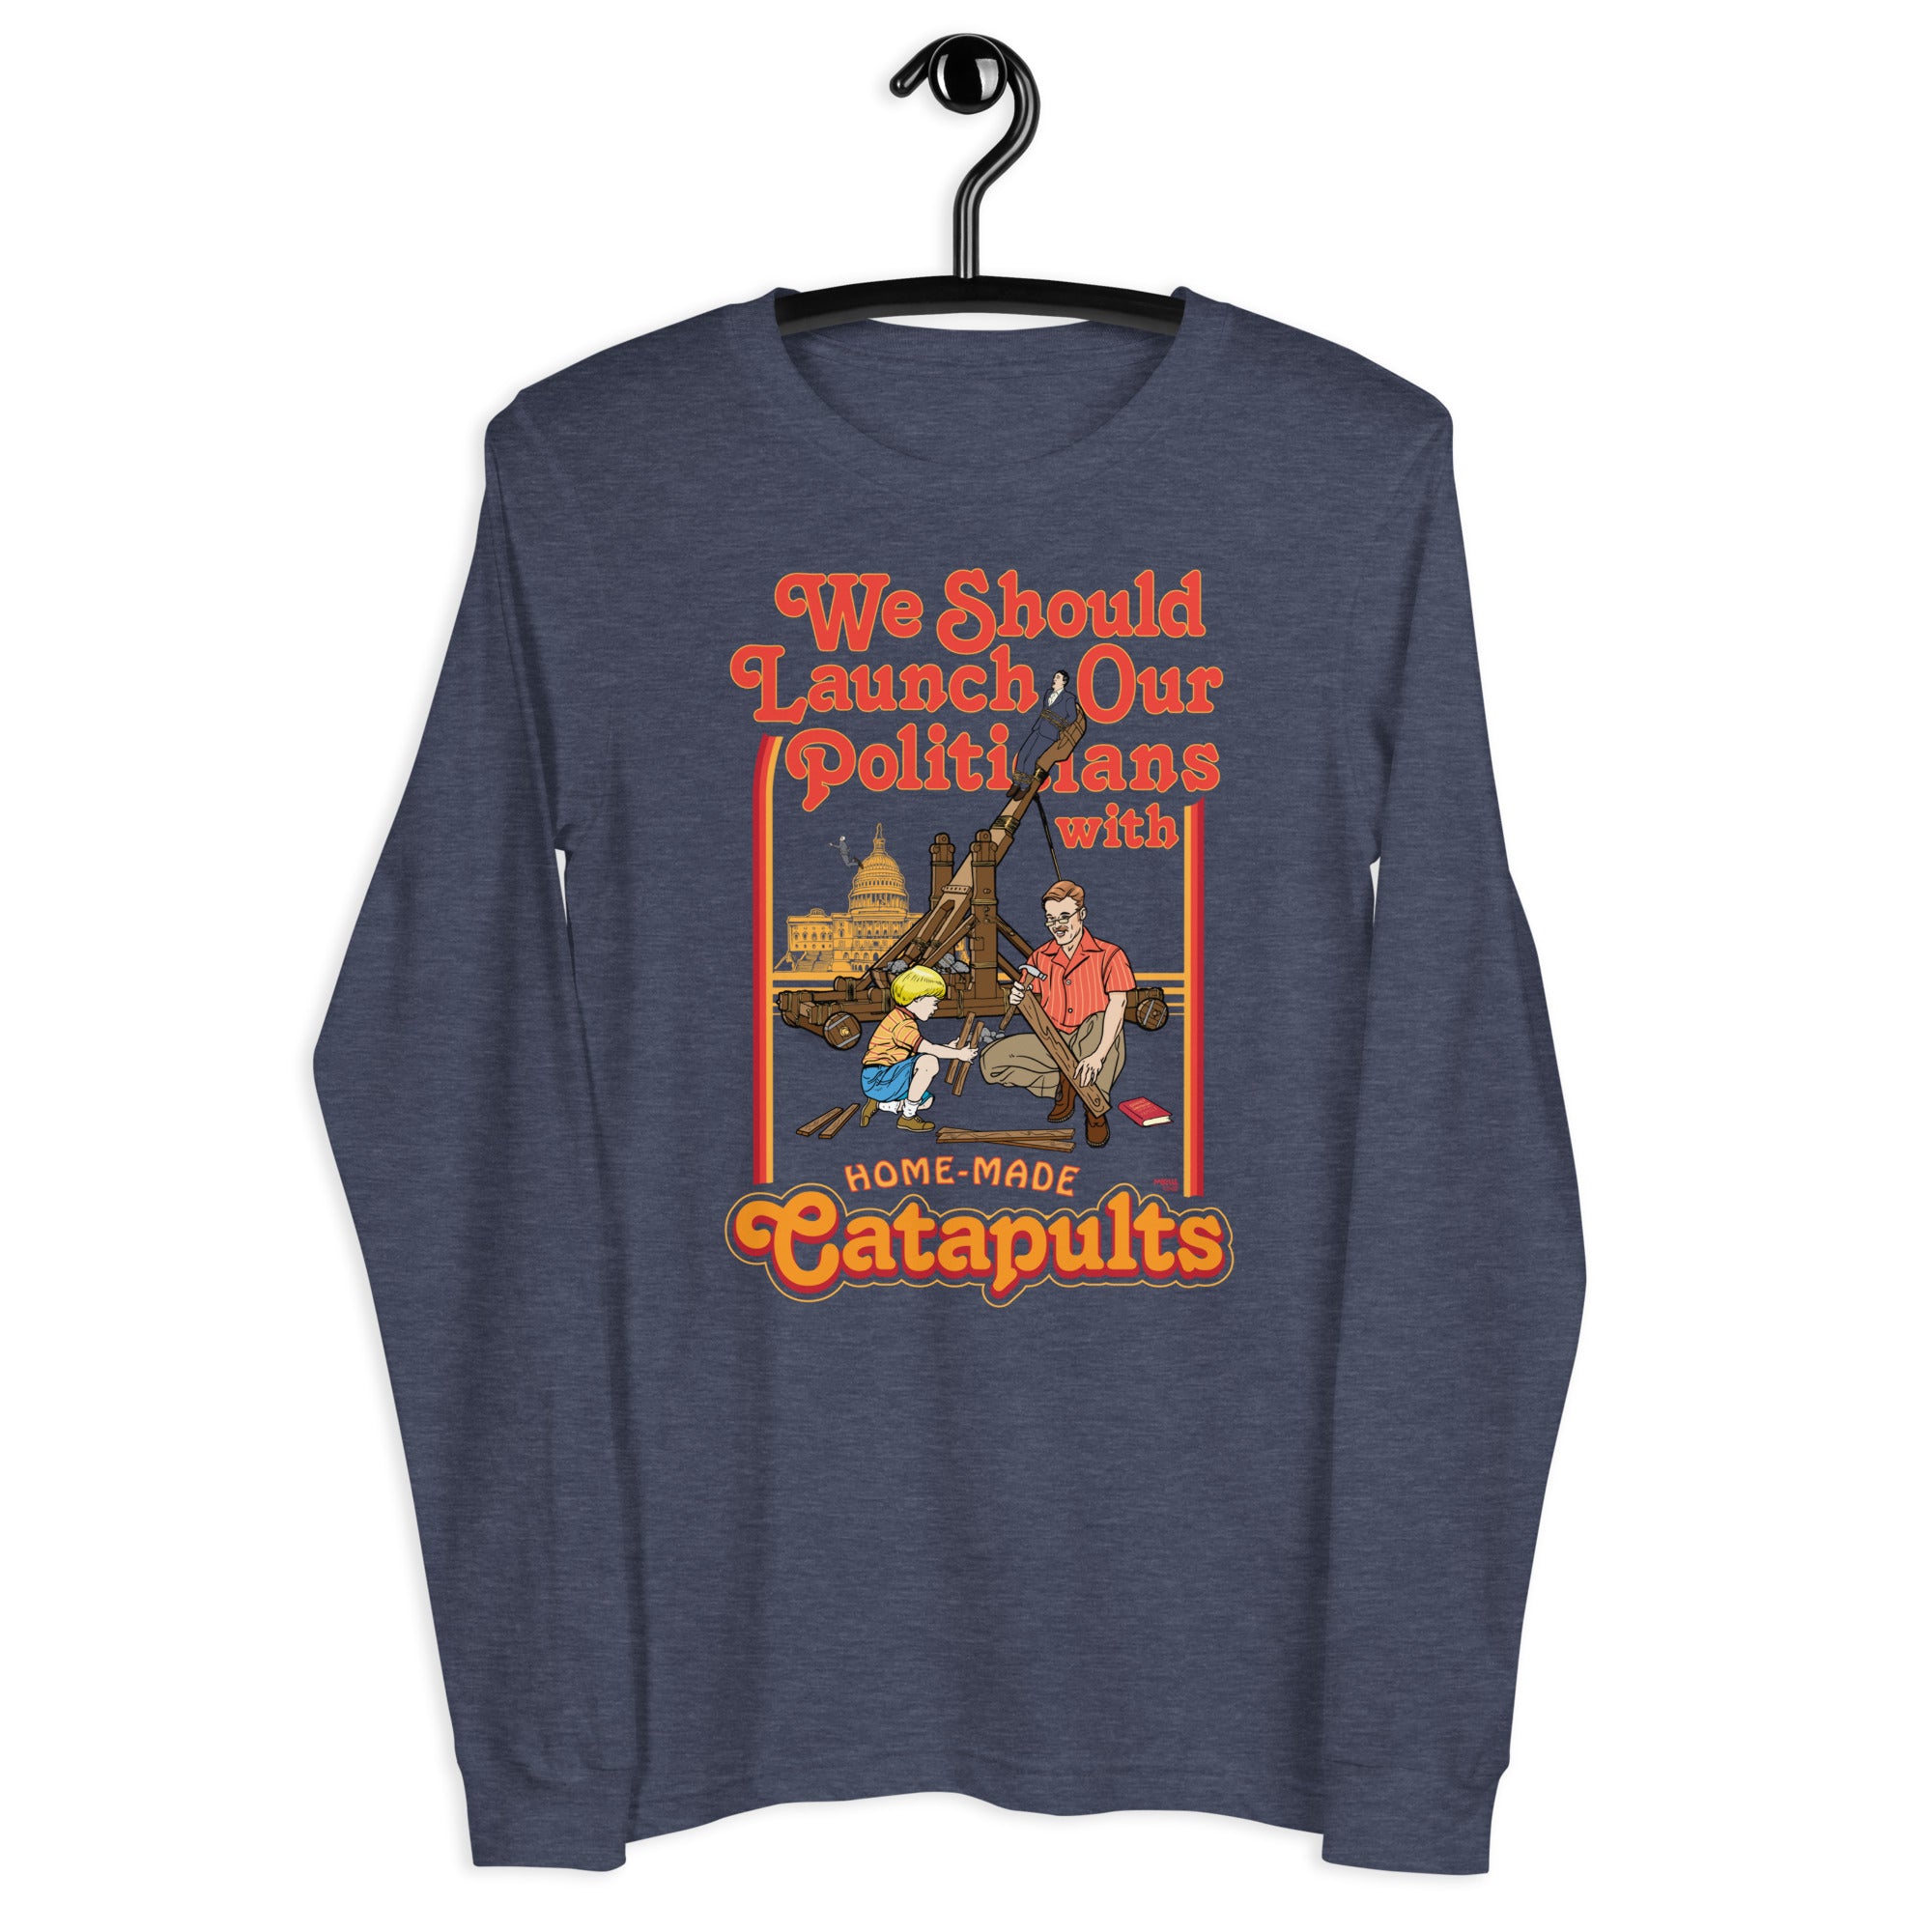 We Should Launch Our Politicians from Catapults Long Sleeve Tee